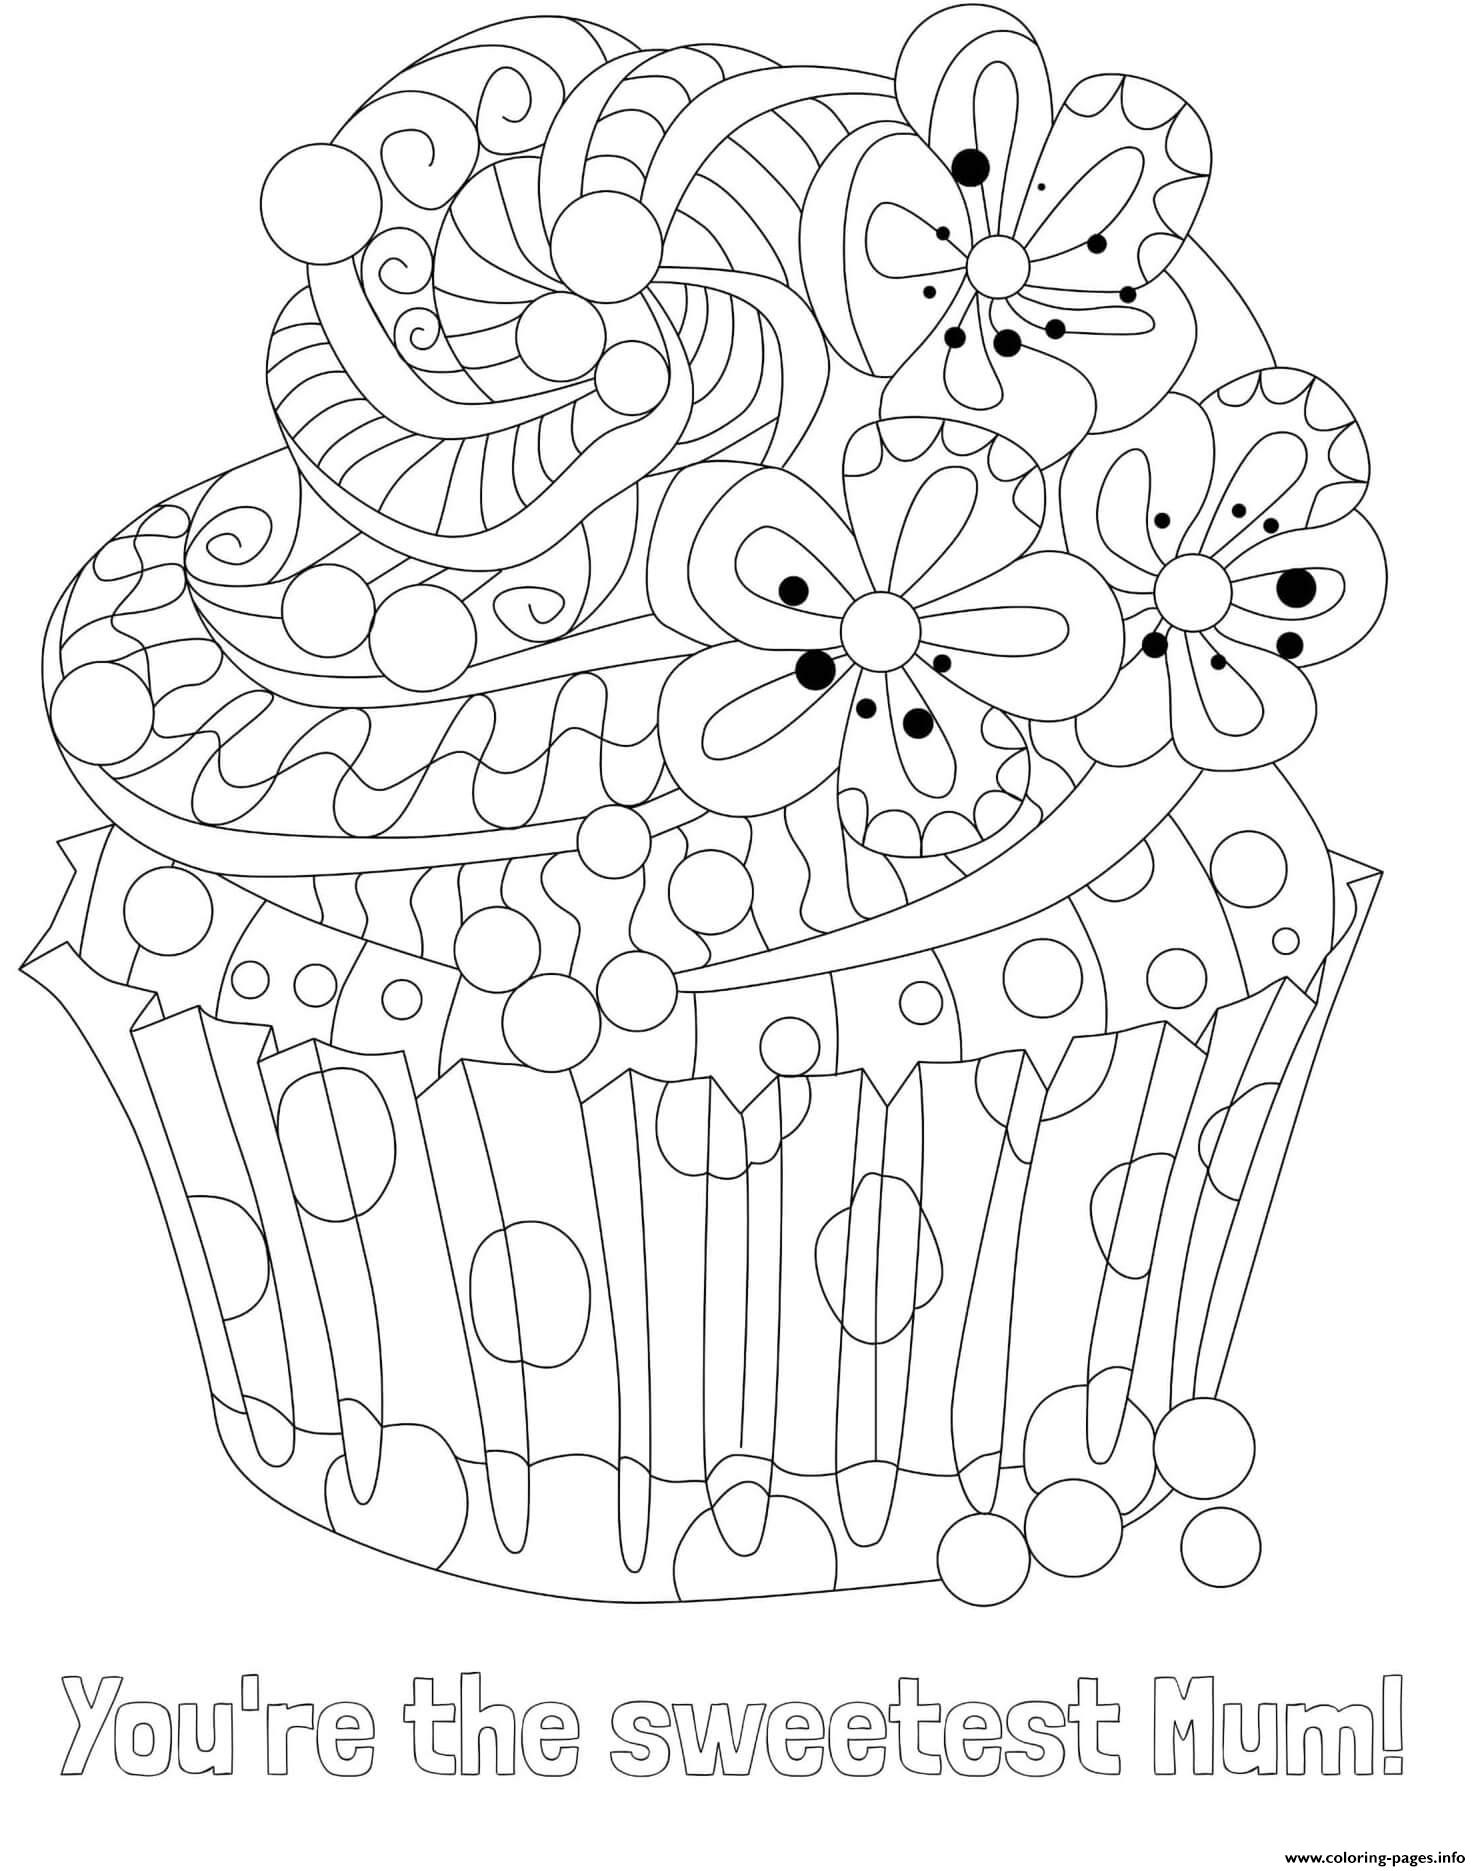 Mothers Day Cupcake Sweetest Mum Doodle Coloring Pages Printable